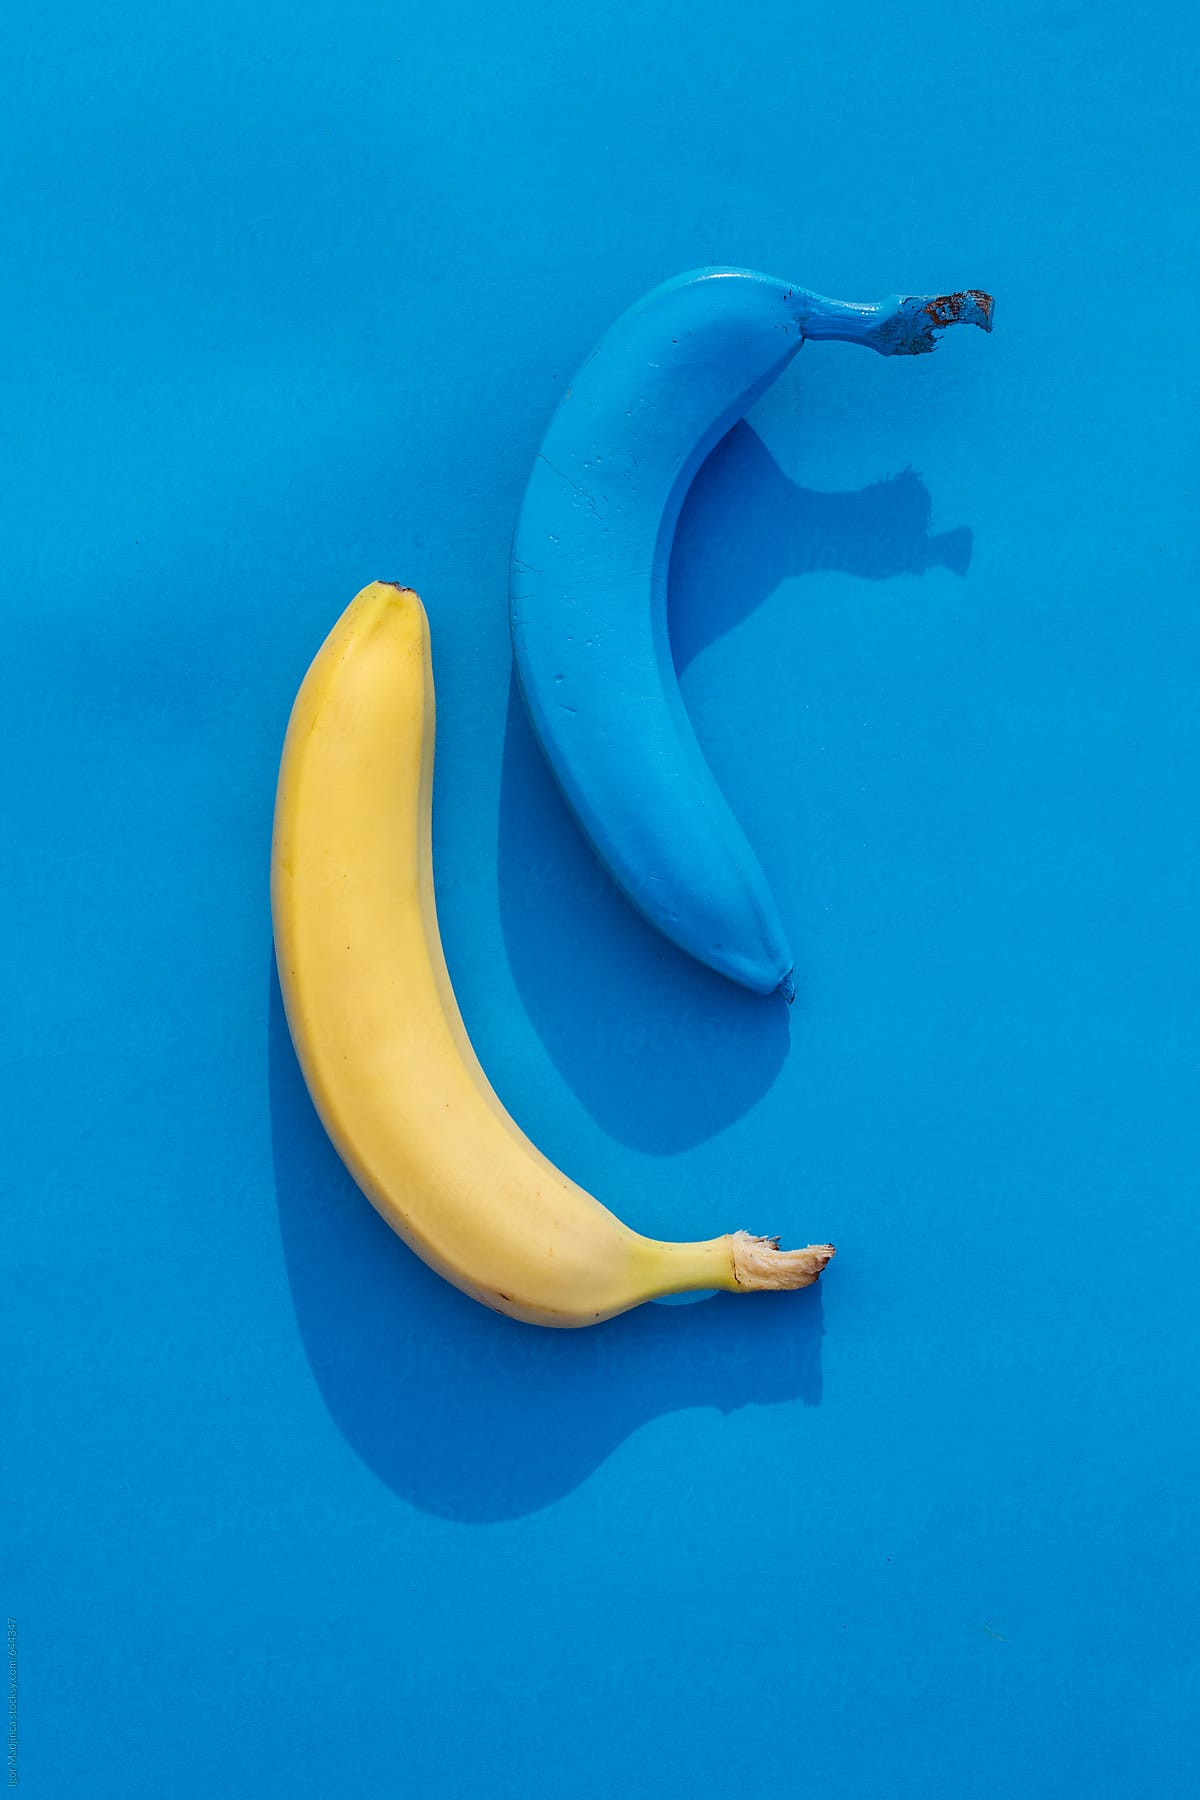 Blue And Yellow Banana On A Blue Background In The Sun by Stocksy  Contributor Igor Madjinca - Stocksy